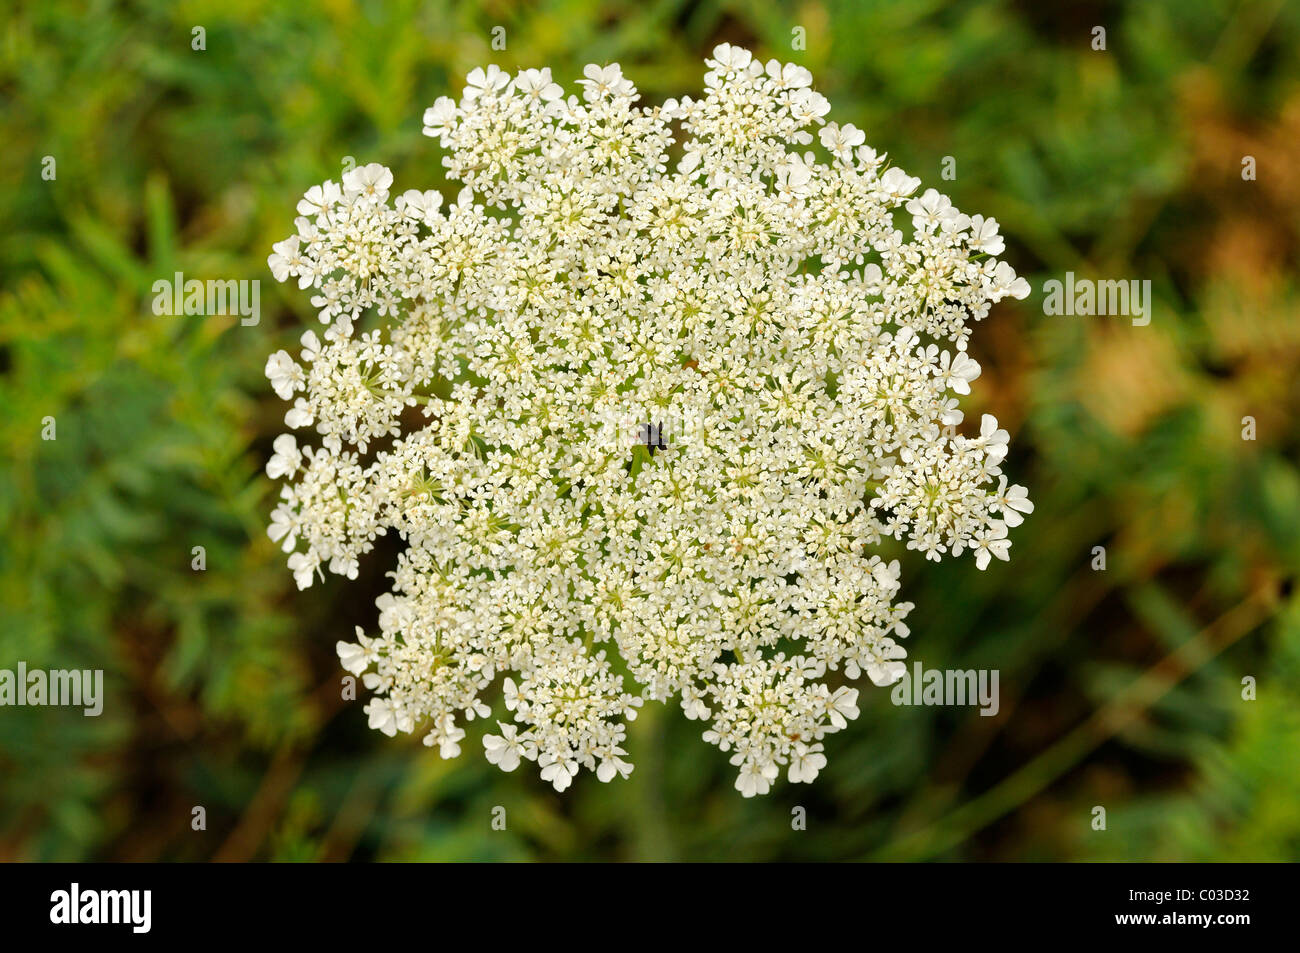 Flower umbel of Wild Carrot (Daucus carota) with a contrasting black flower in the centre that serves to attract insects Stock Photo